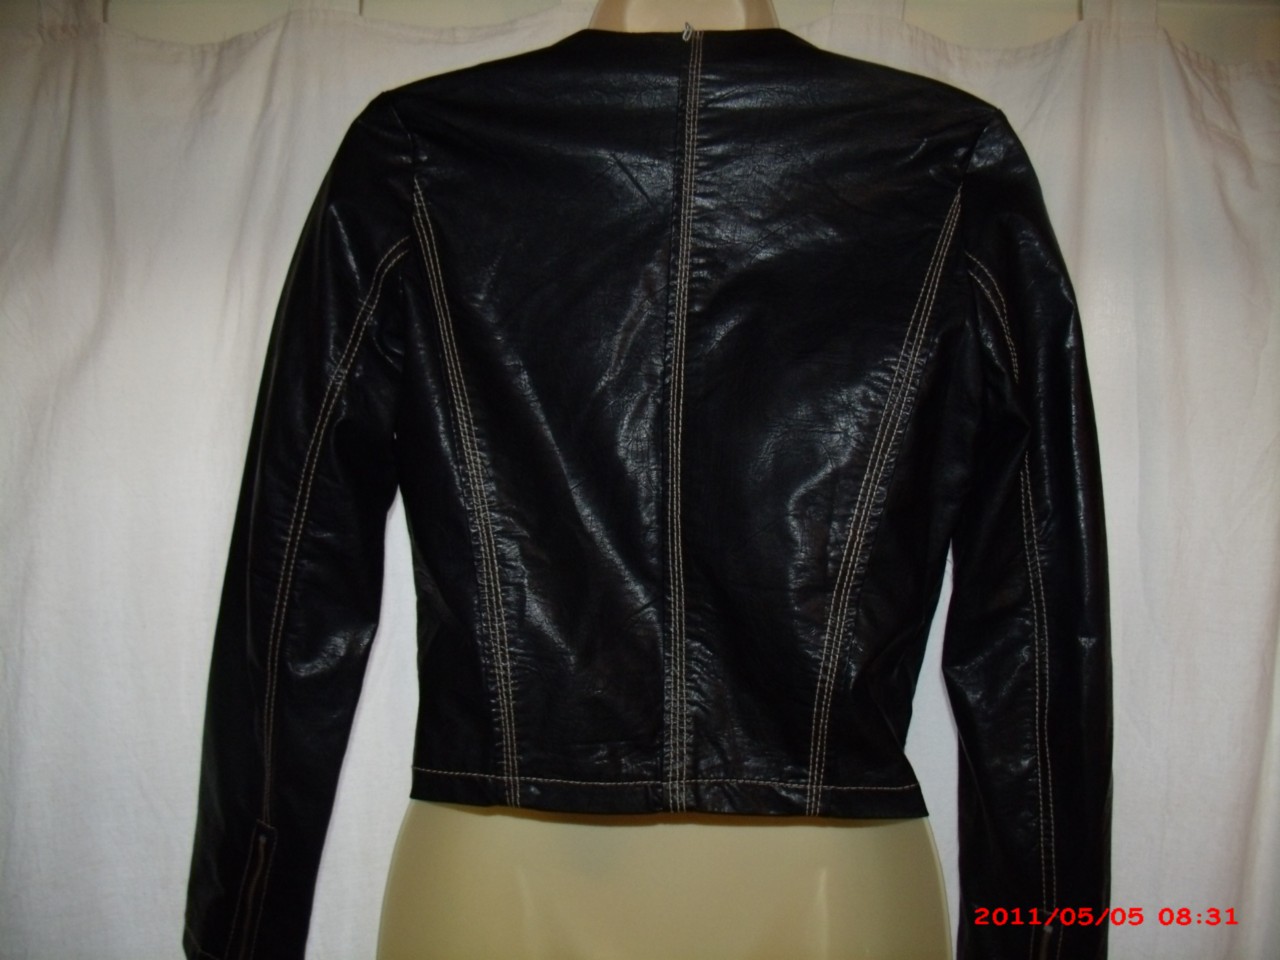 New and Loved Fashion Warehouse: A RARE Genuine Black Leather Women's ...